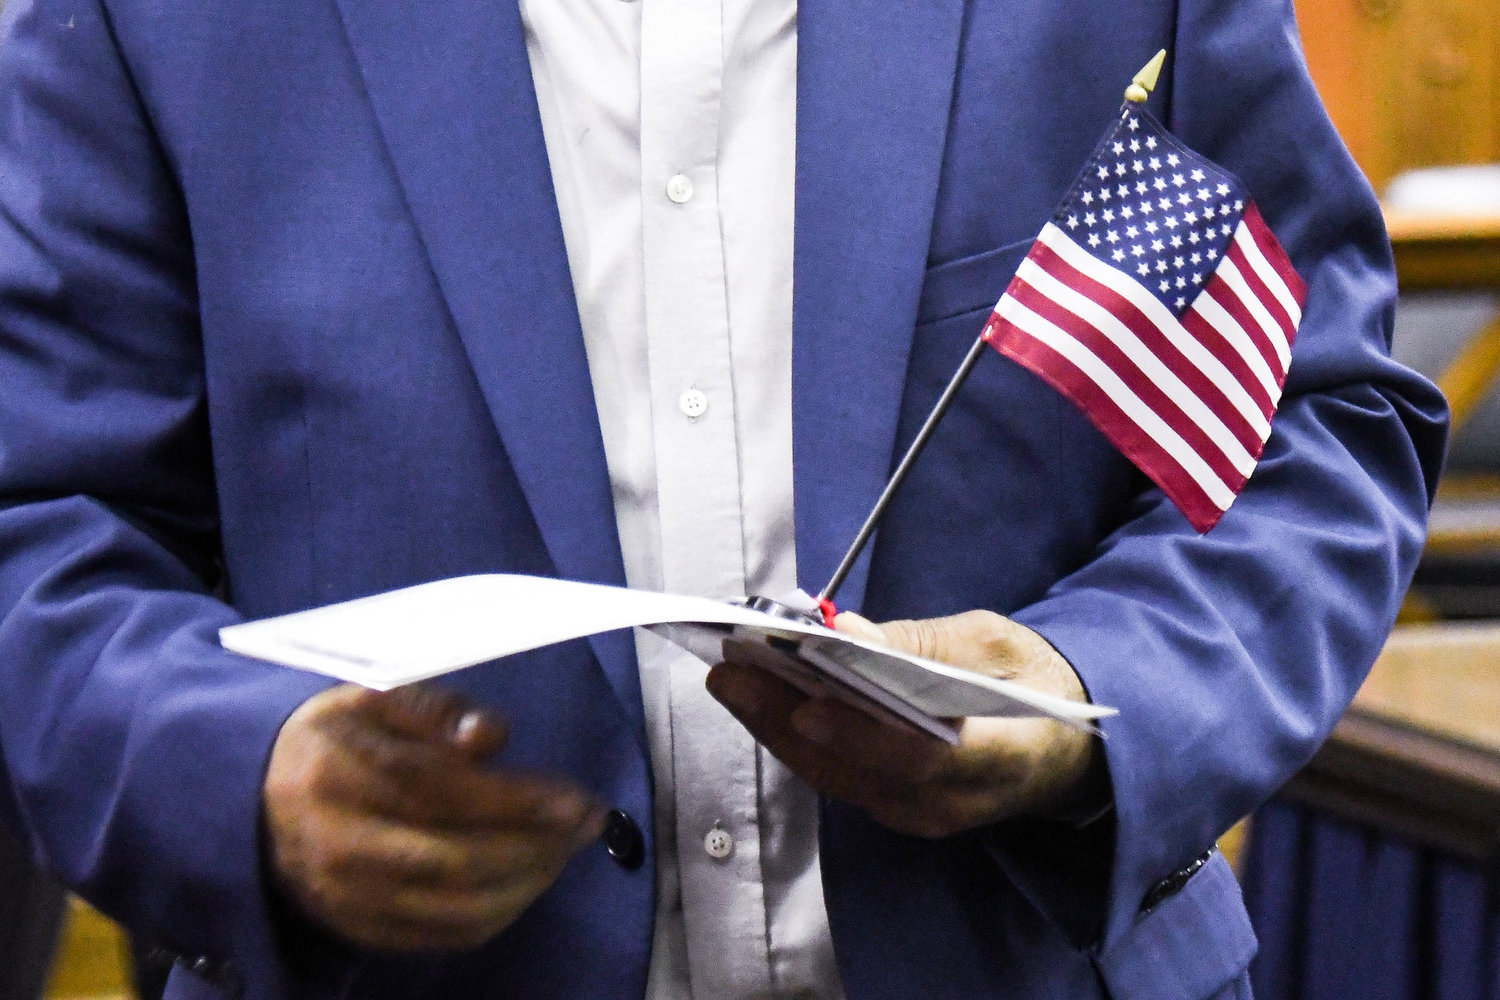 A man holds a small American flag while receiving his certificate of citizenship during a naturalization ceremony on Thursday at the federal courthouse in Utica.